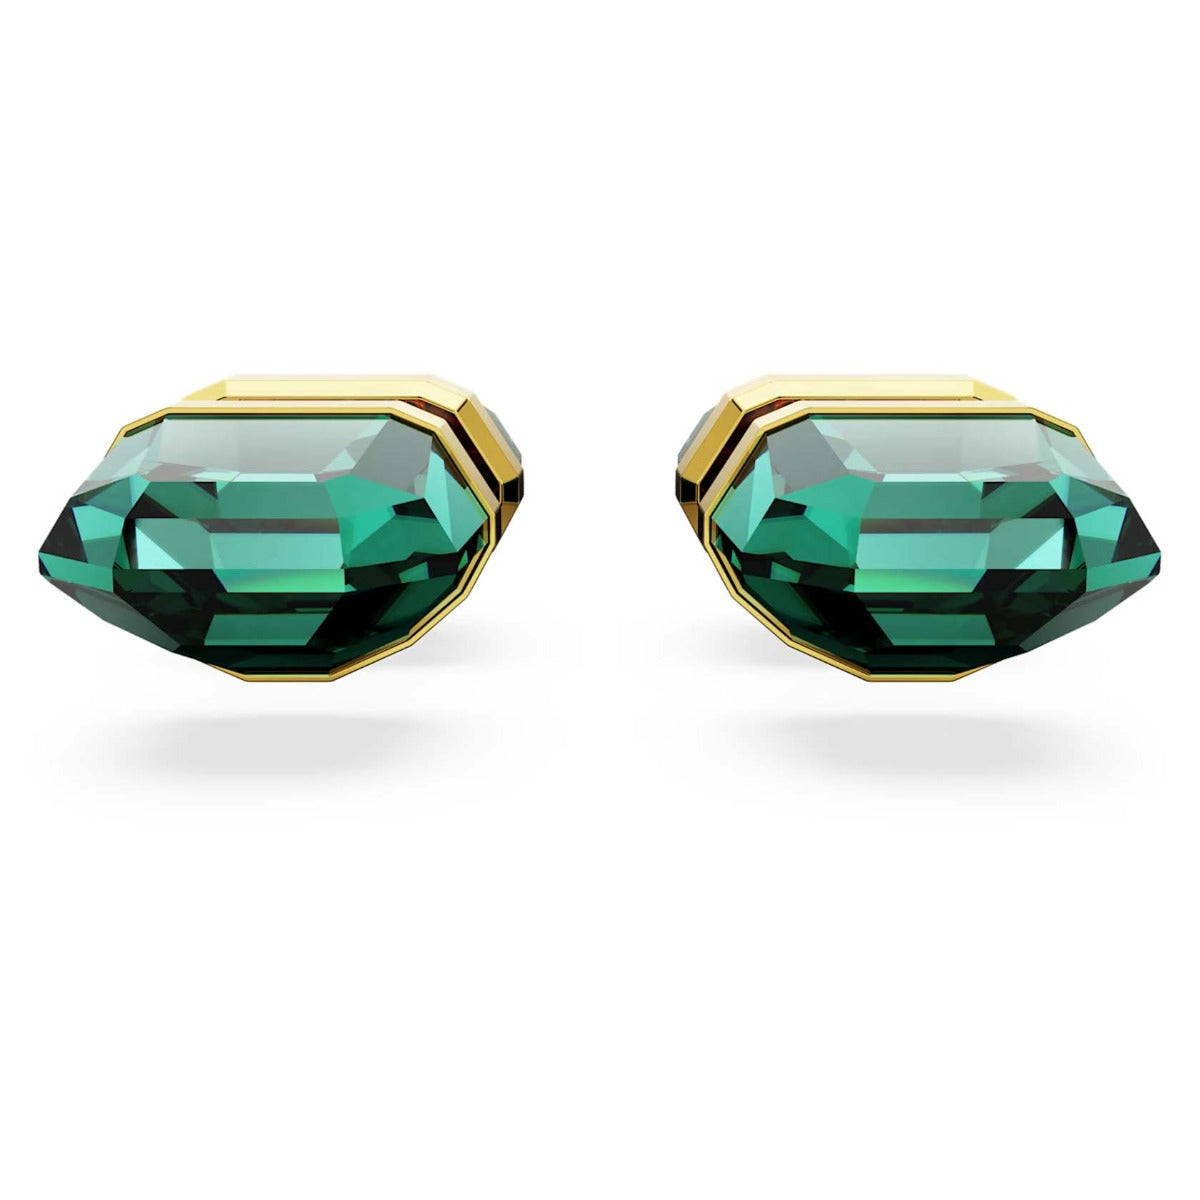 Swarovski Lucent Stud Earrings, Green, Gold-tone plated